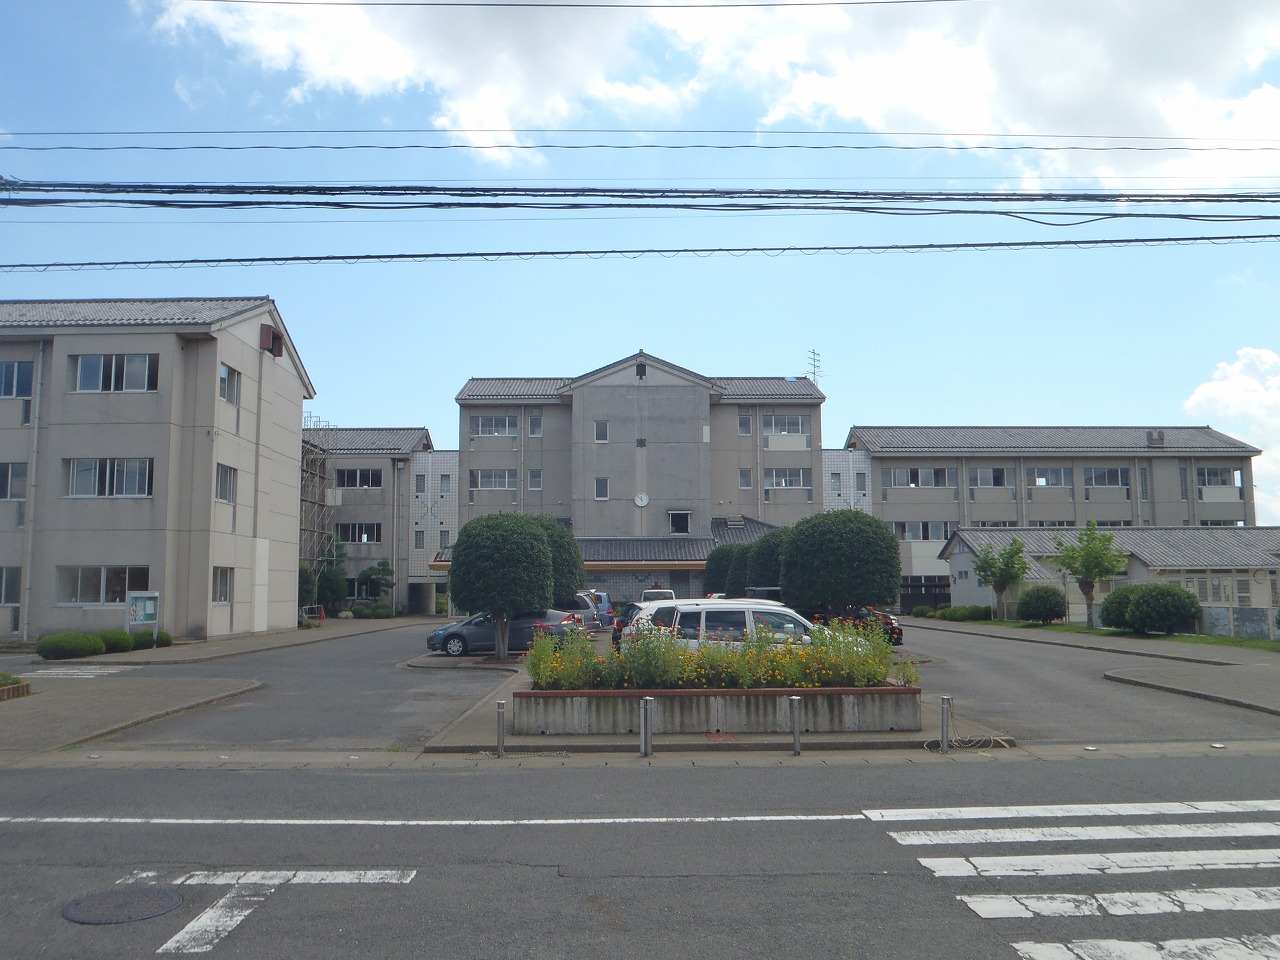 Primary school. Hitachinaka 1100m to stand outfield elementary school (elementary school)